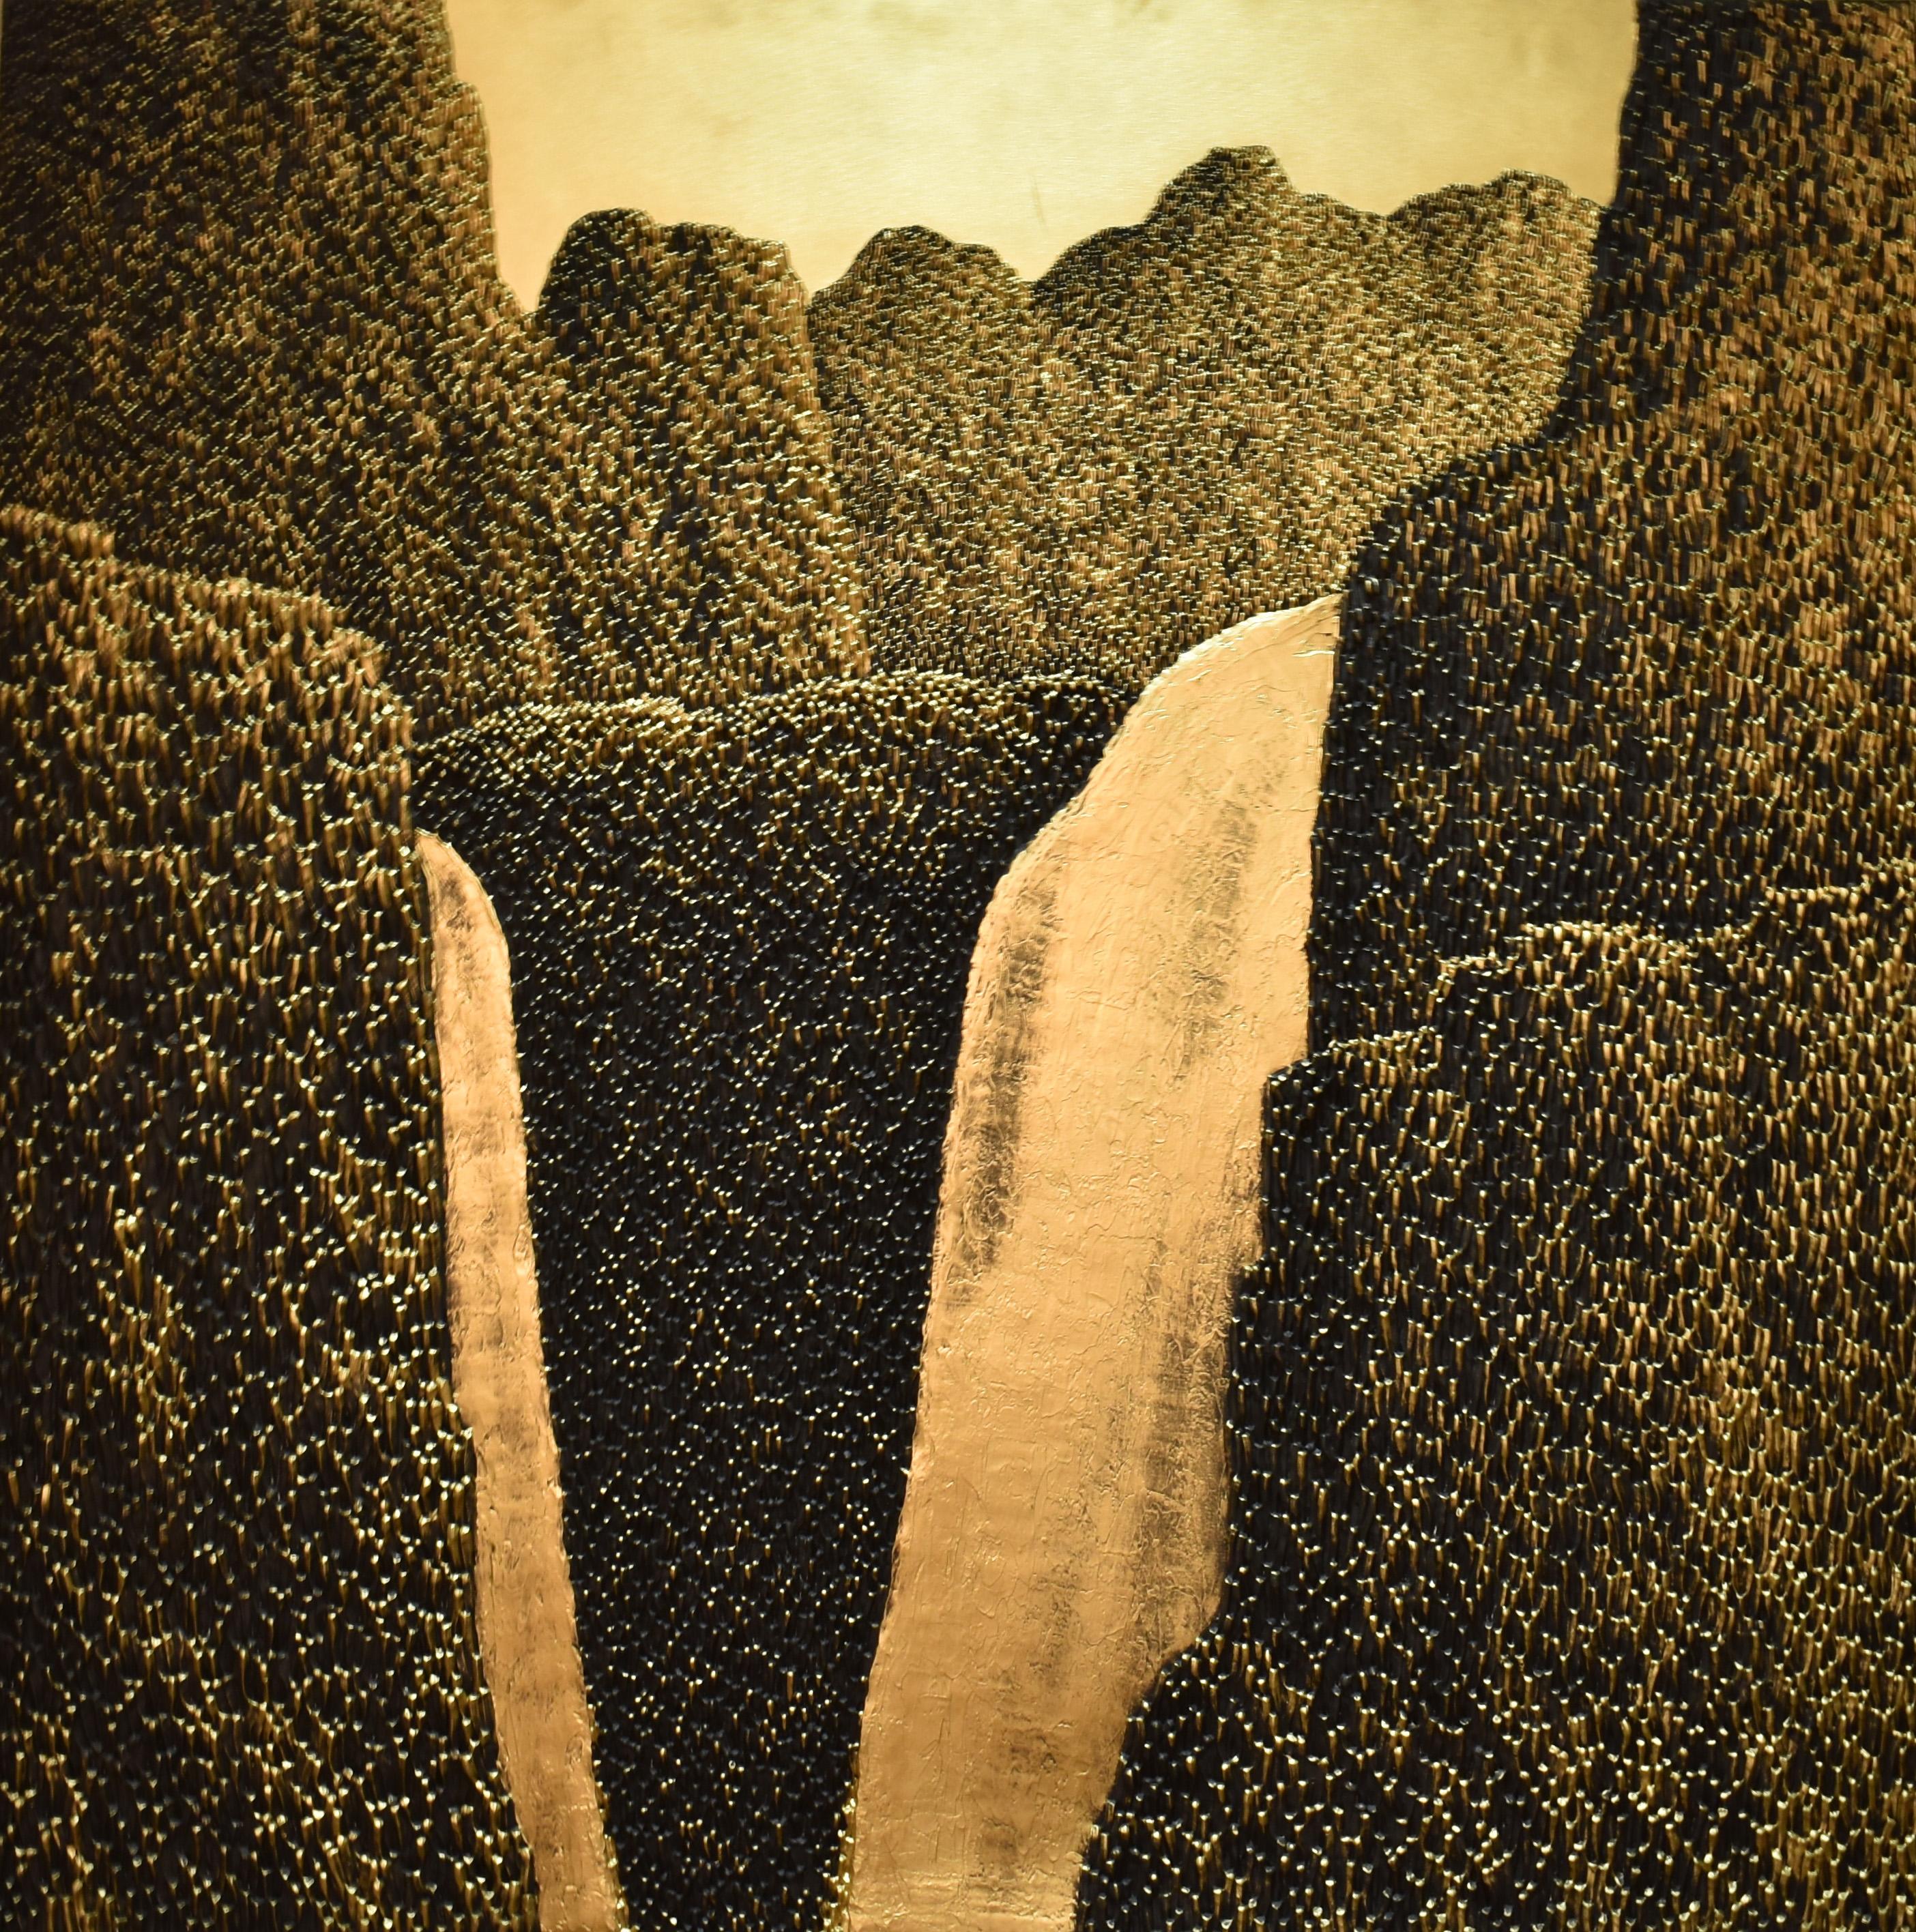 Saenkom Chansrinual Landscape Painting - "Grand Mountain & Waterfall IV", Gold impasto painting, solid acrylic on canvas